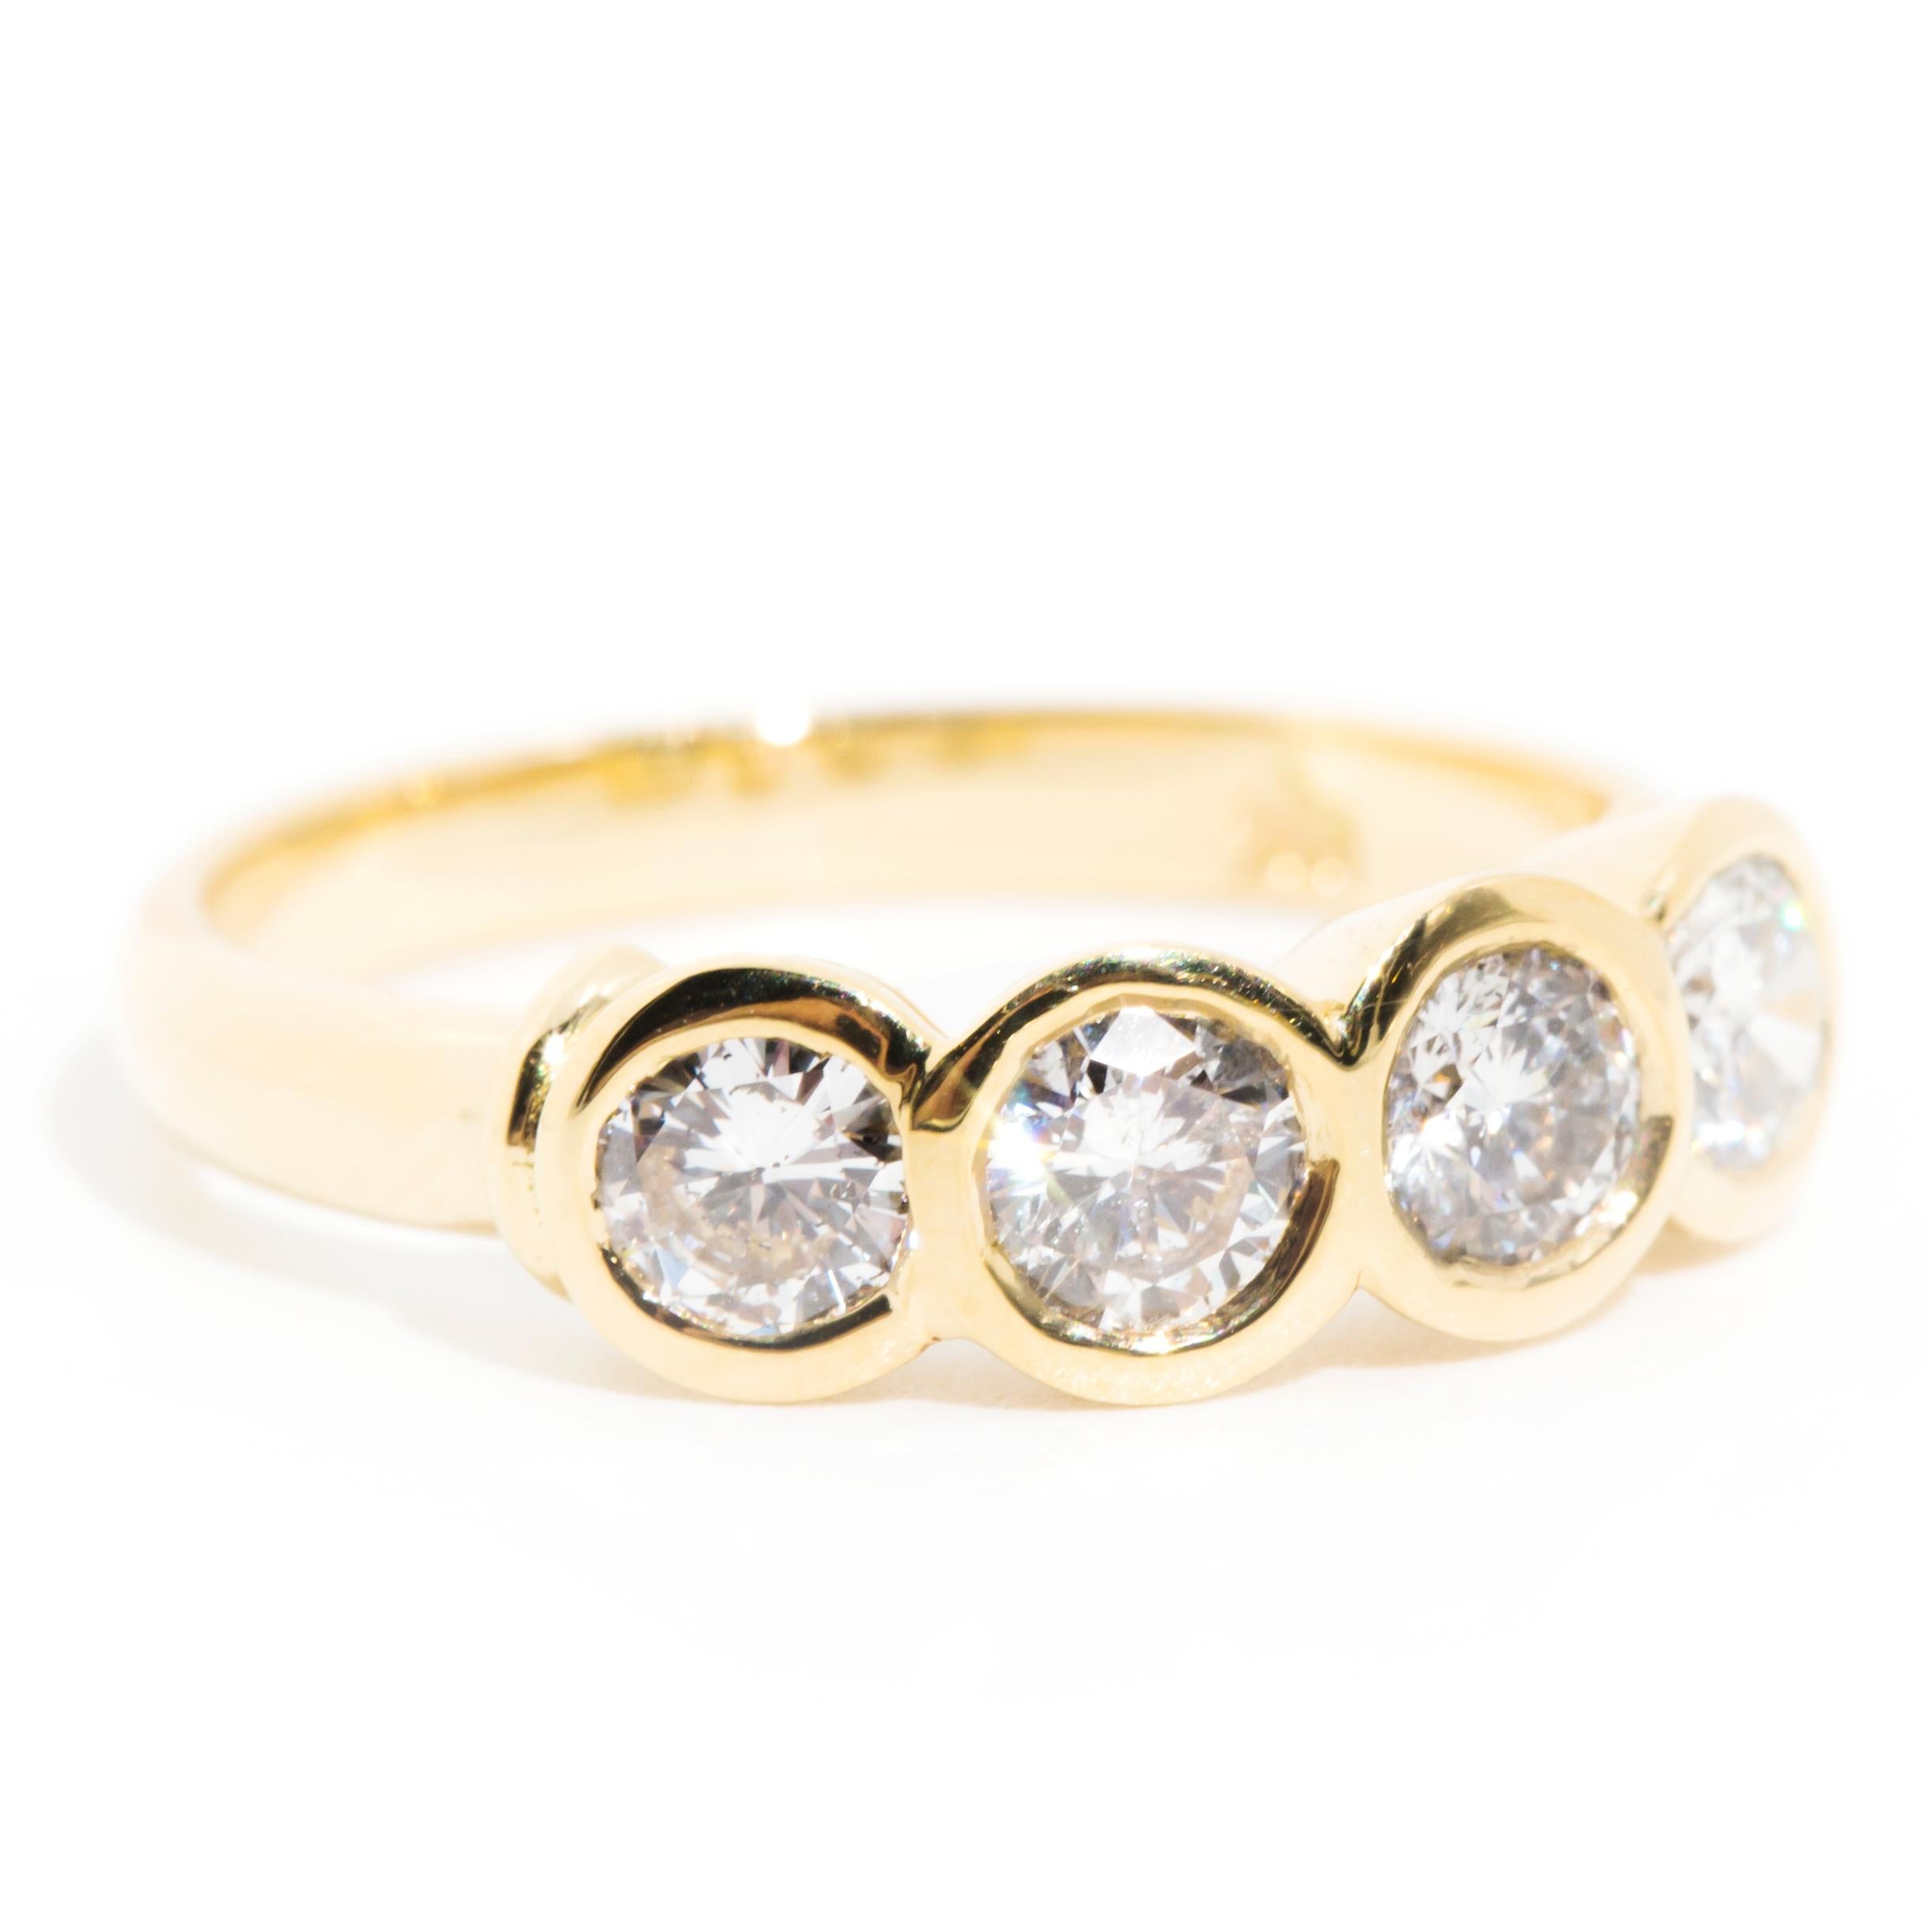 Round Cut Brilliant Diamond Vintage Four Stone Engagement Ring in 18 Carat Yellow Gold